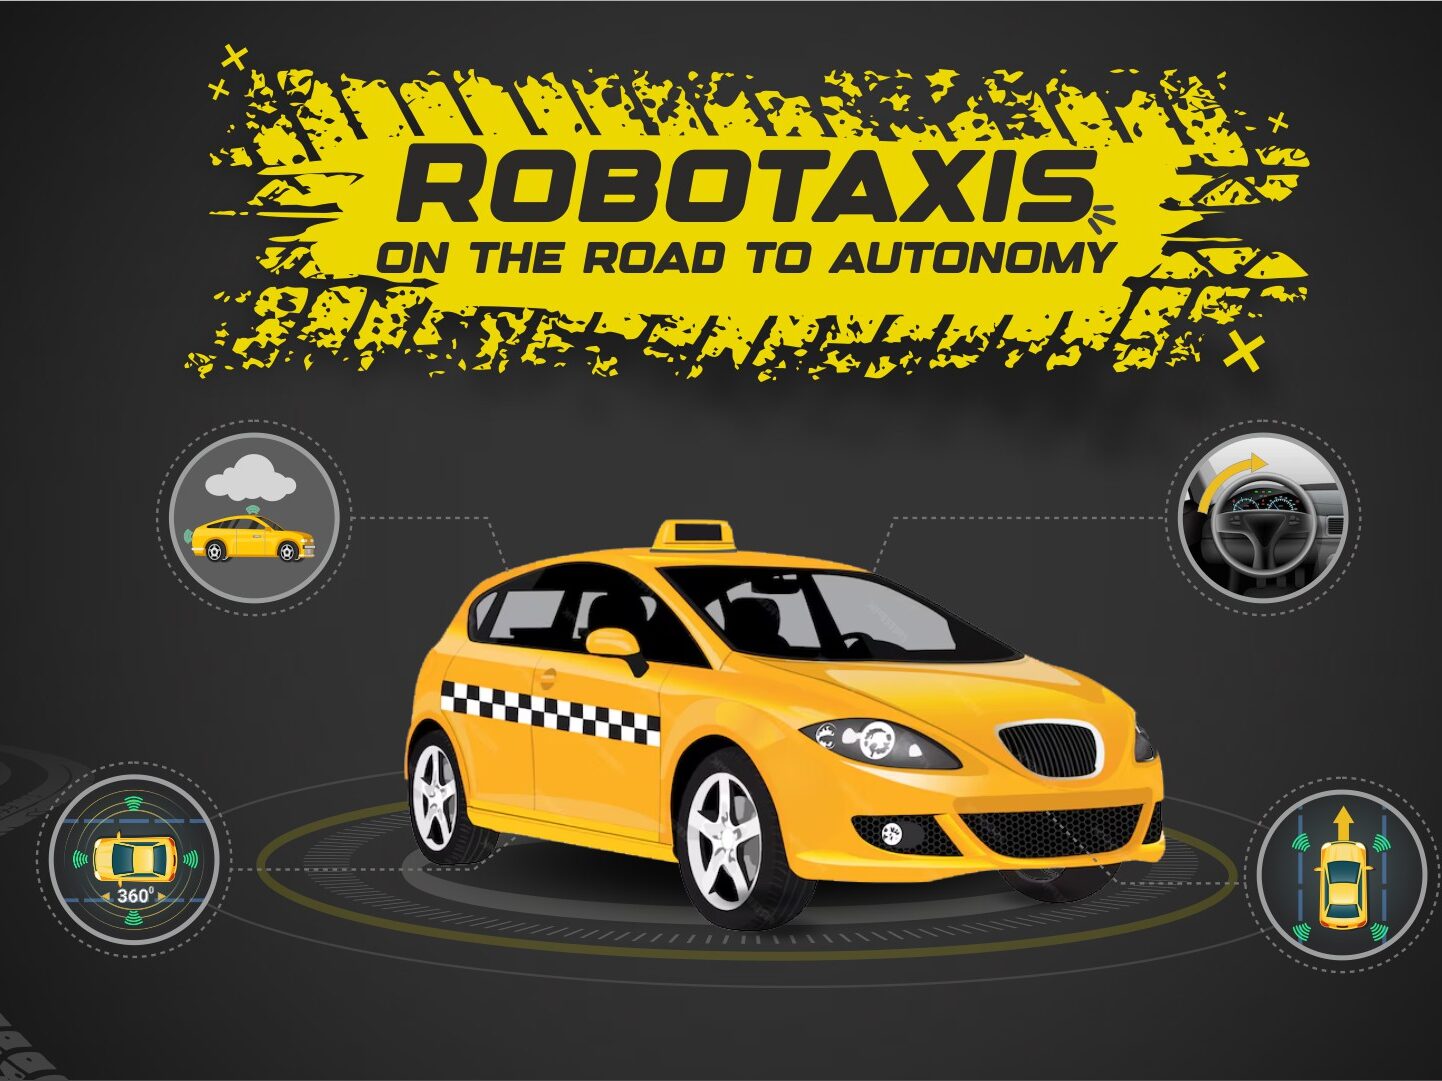 Robotaxis – On the Road to Autonomy